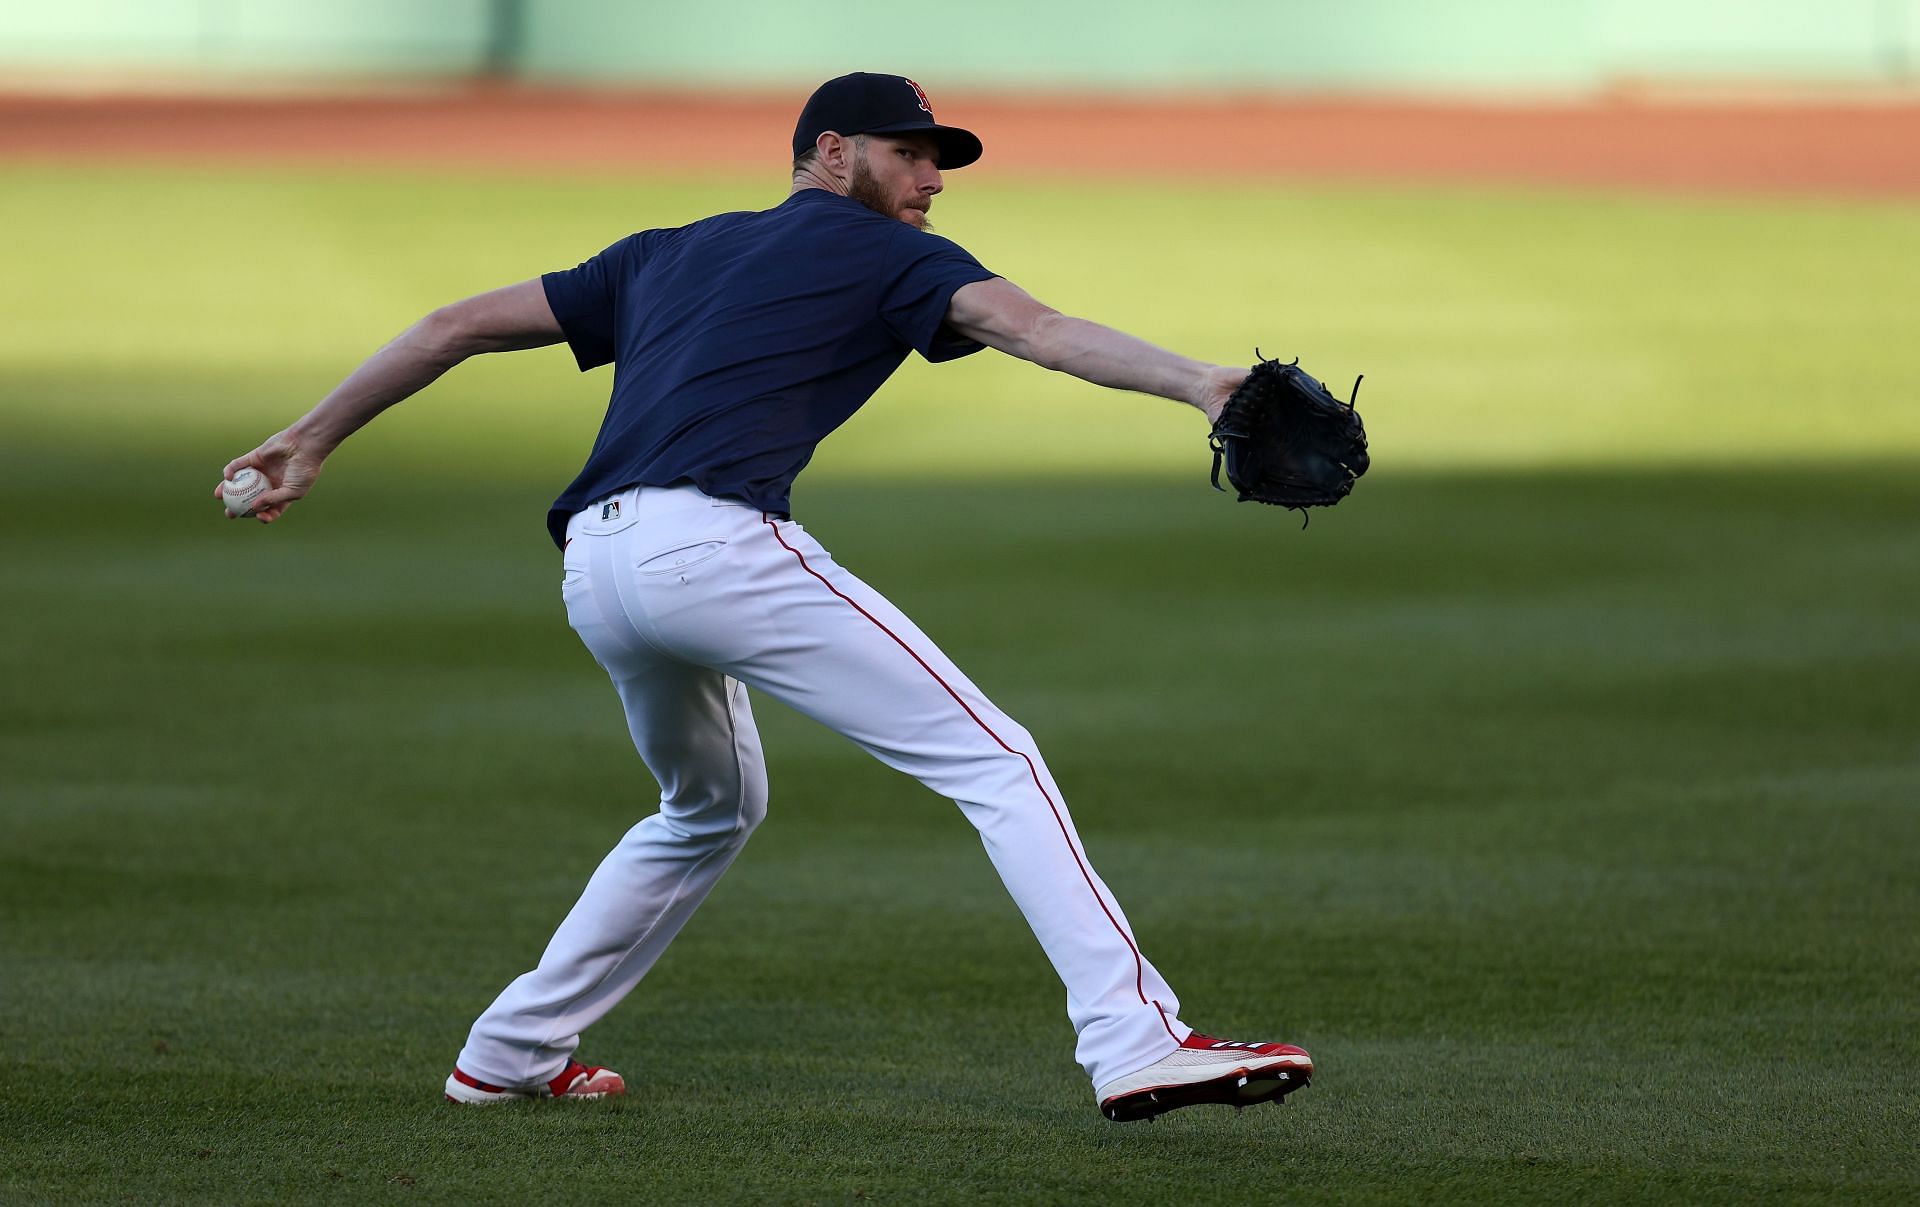 Red Sox could have Chris Sale, Trevor Story back this week